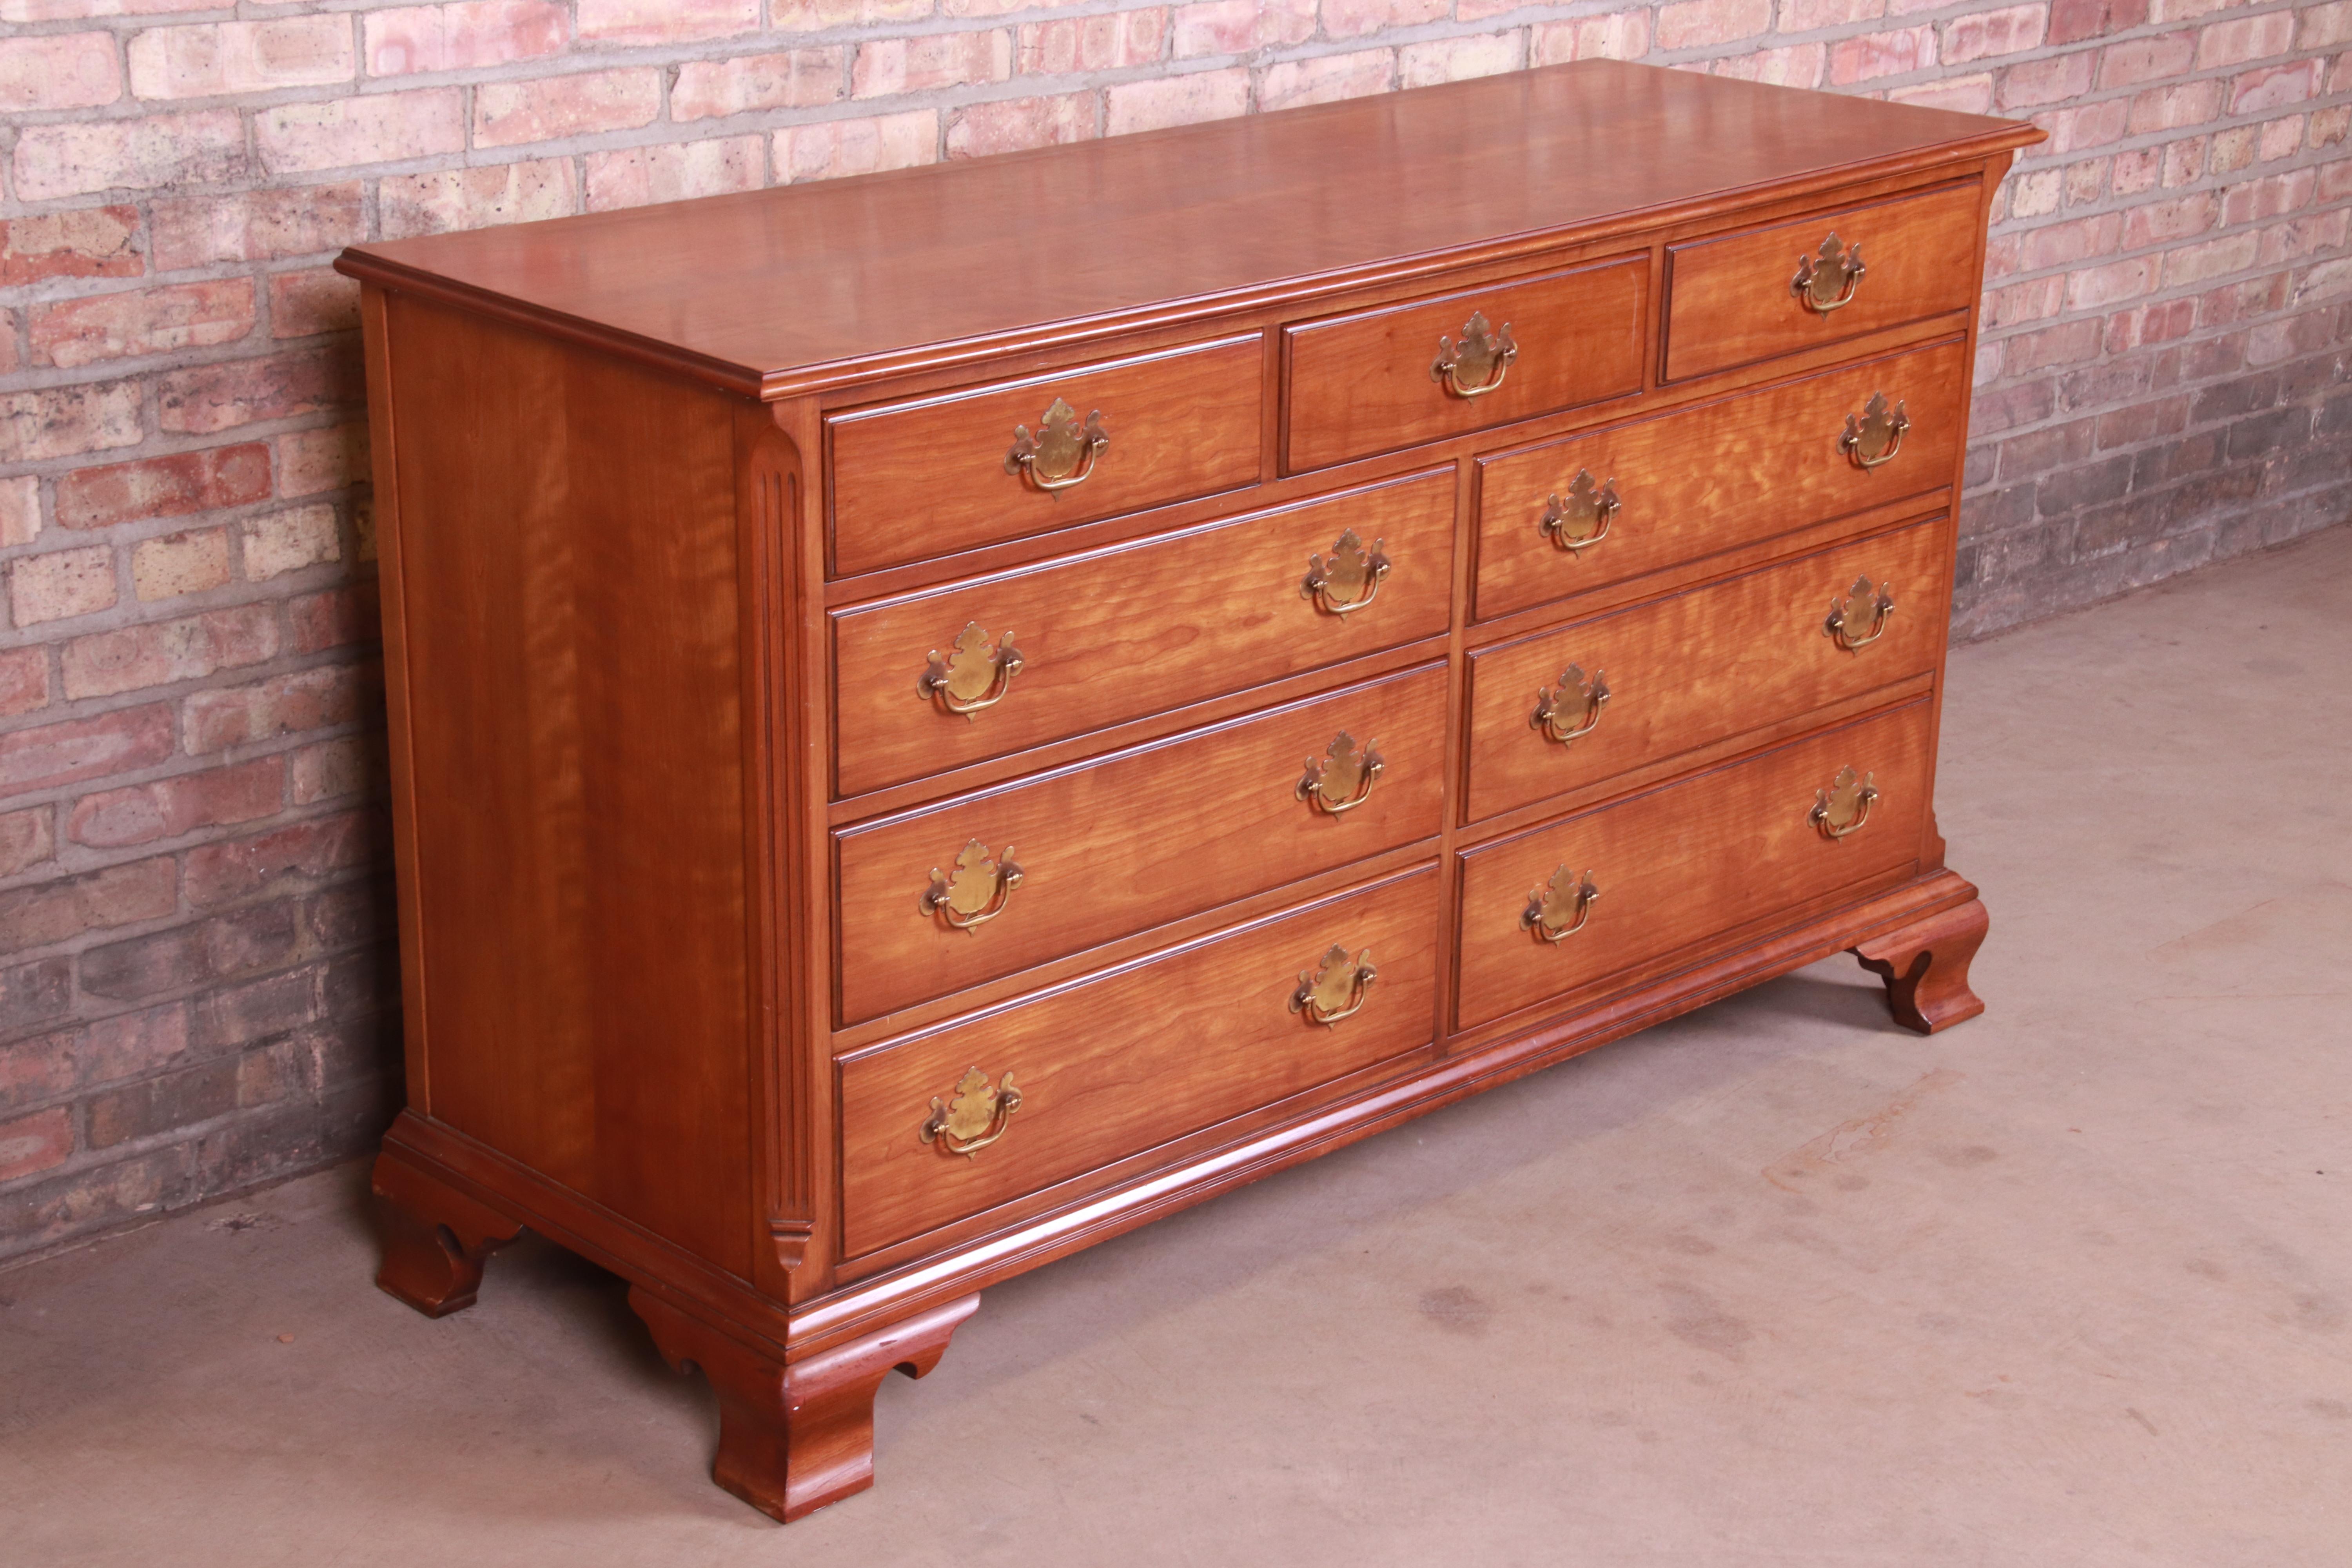 20th Century Kindel Furniture American Chippendale Solid Cherry Wood Dresser or Credenza